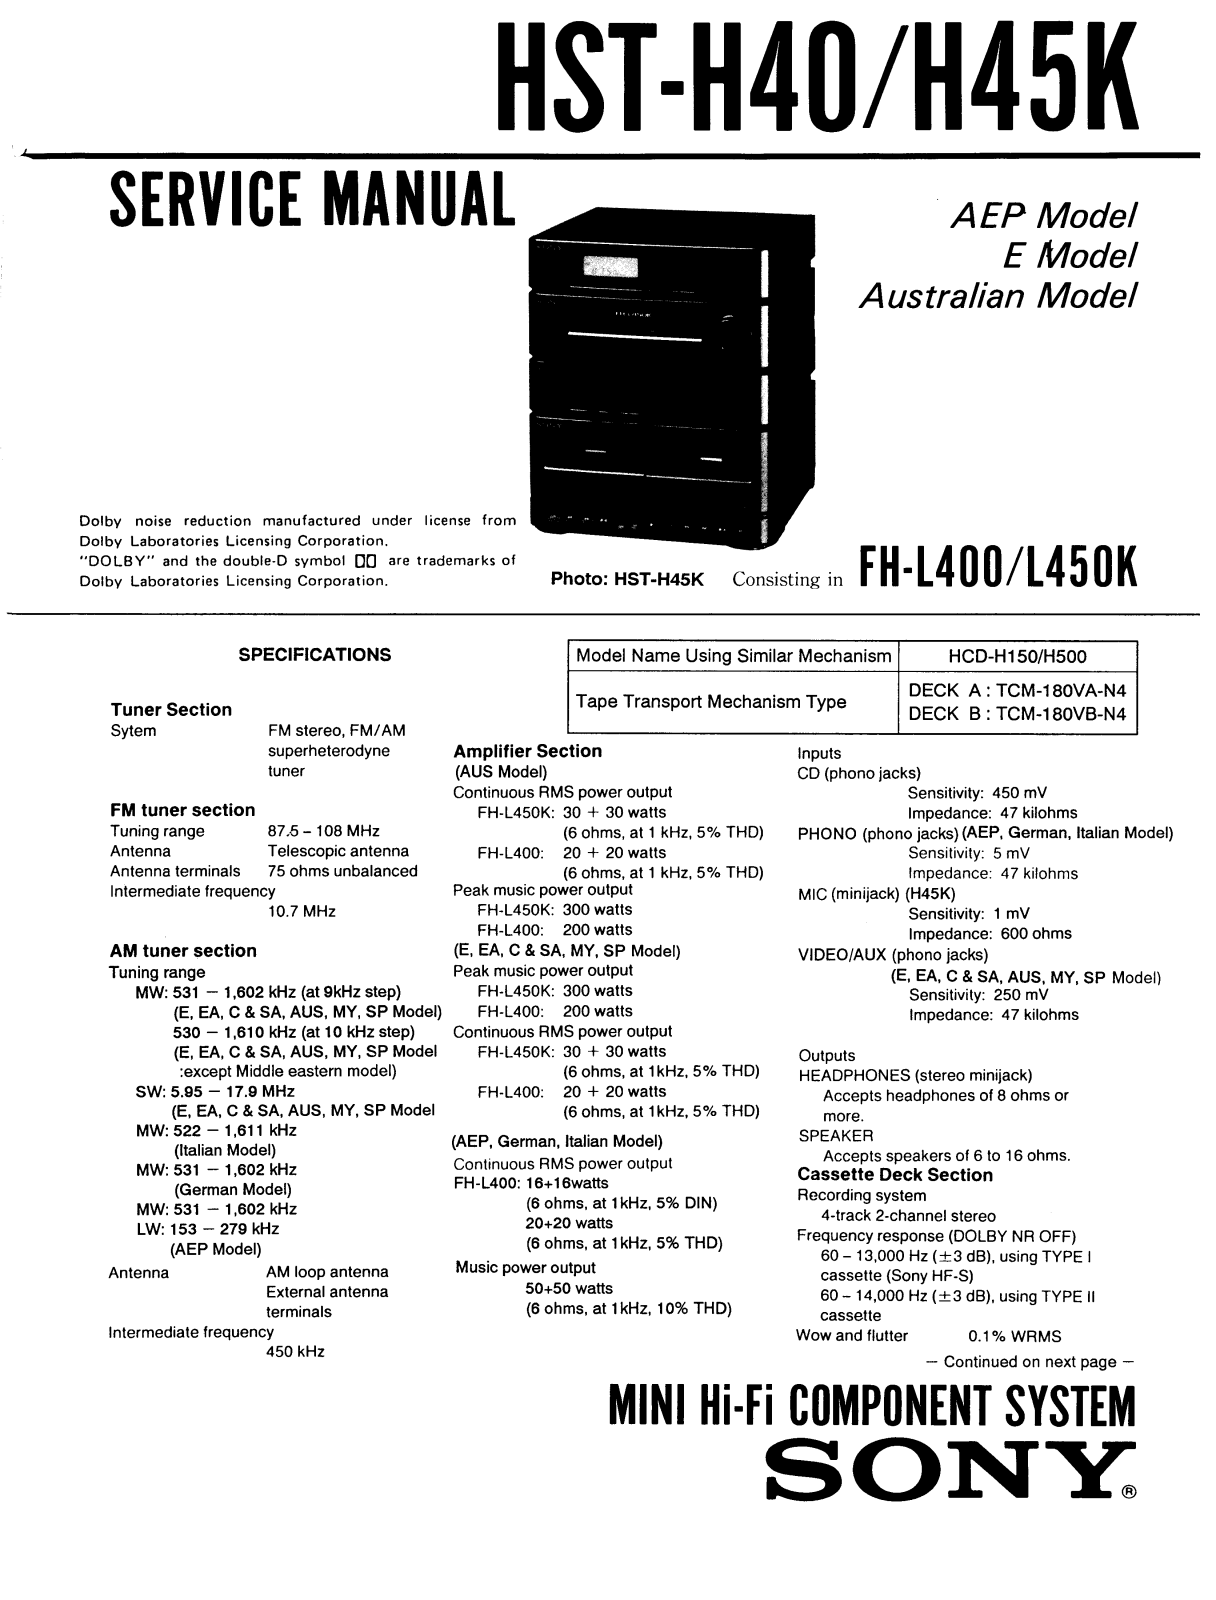 Sony HSTH-40, HSTH-45-K Service manual